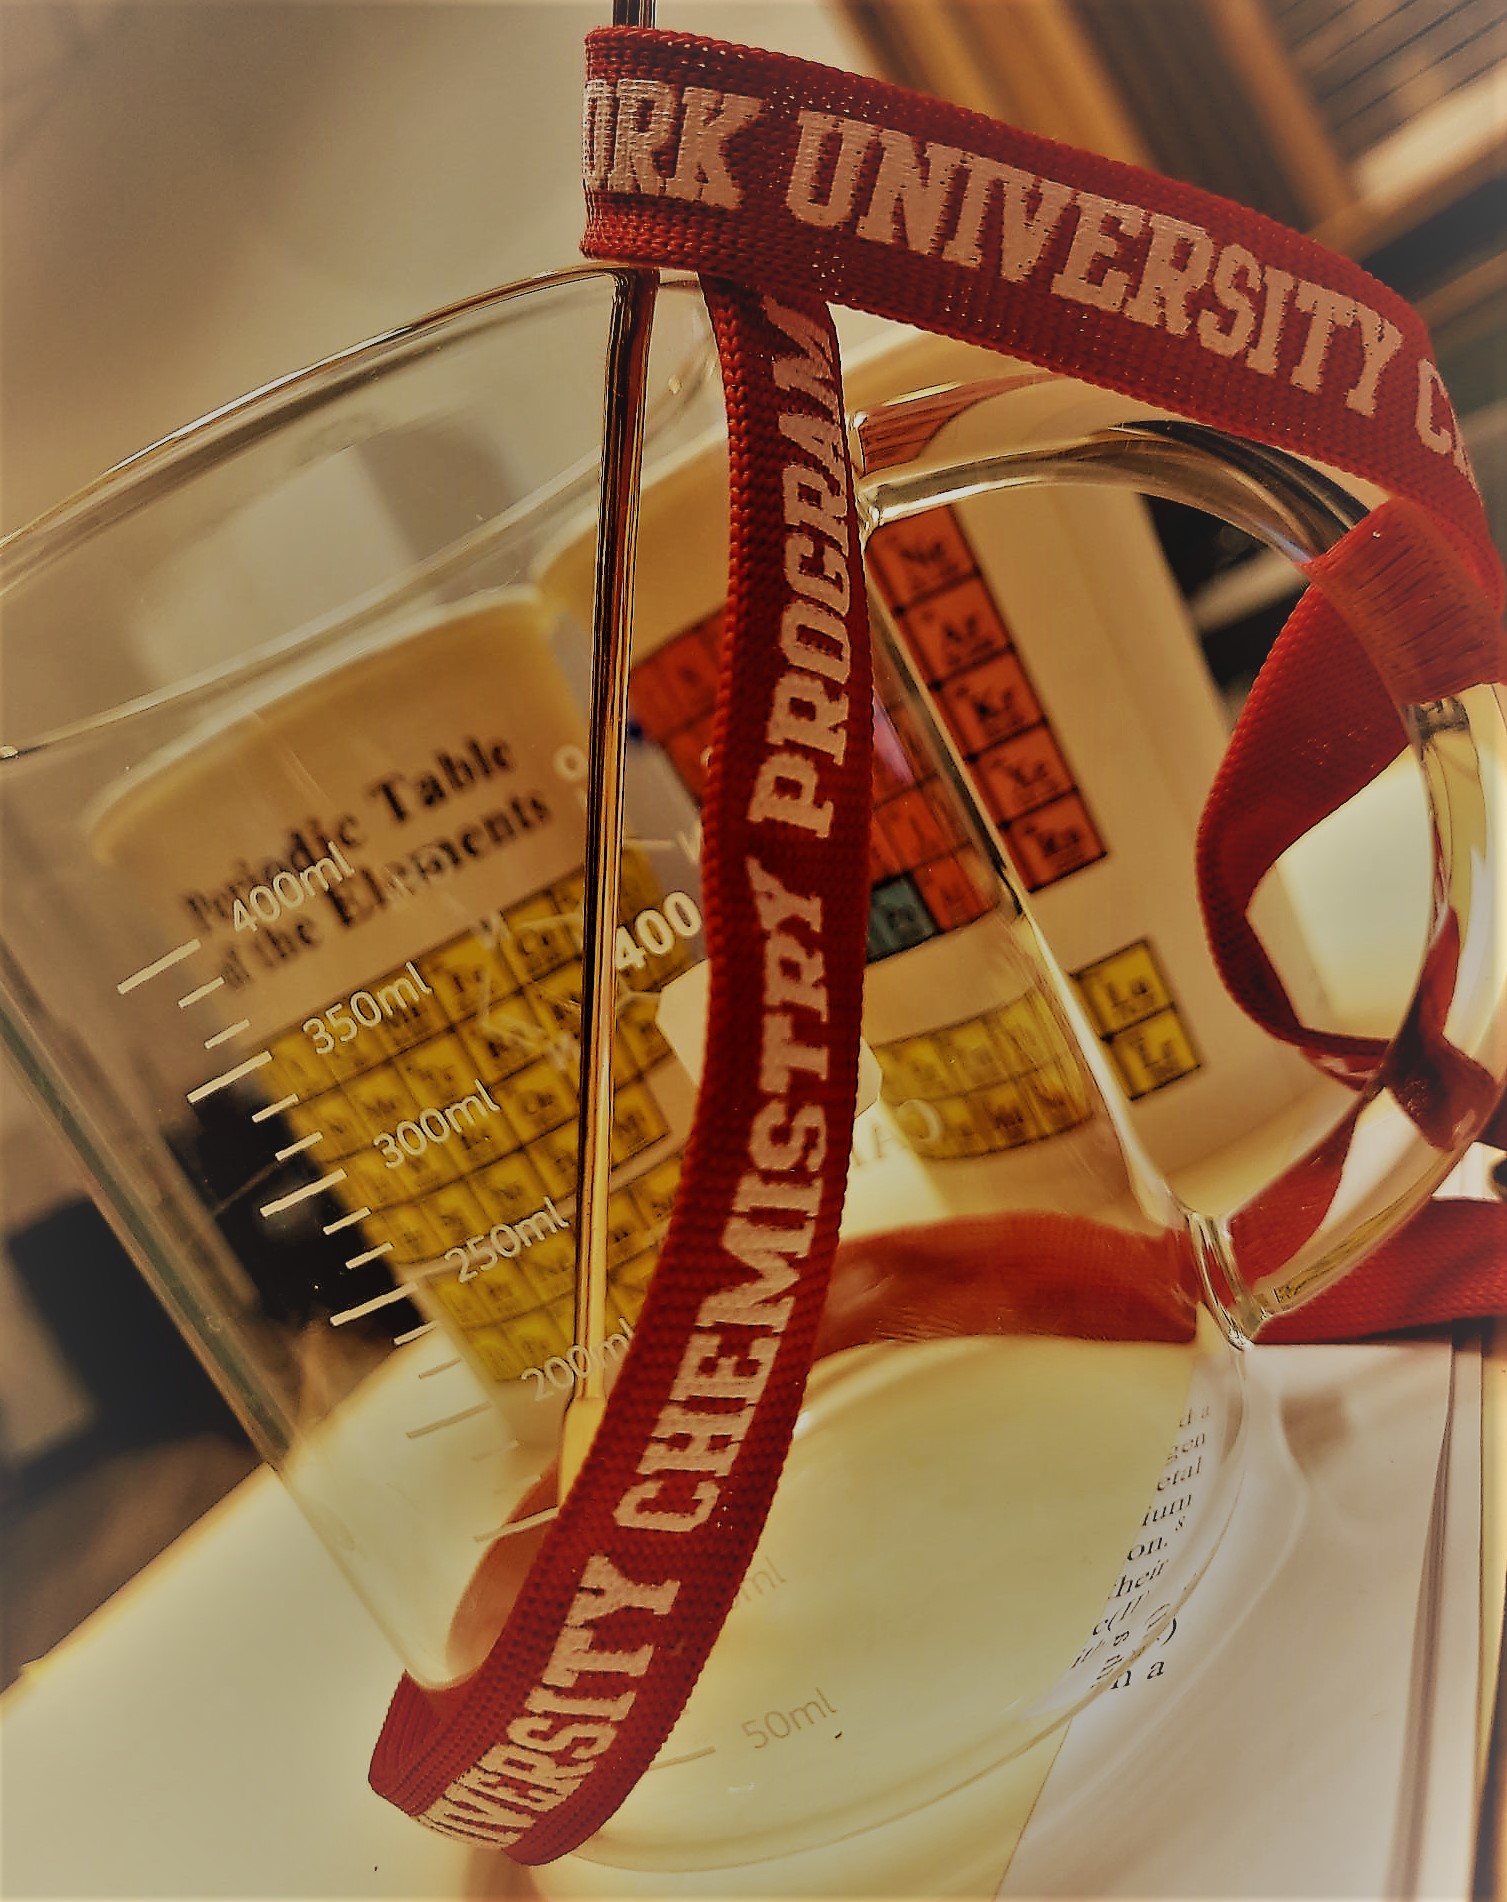 Photo of a mug with a lanyard saying Chemistry Program wrapped around it